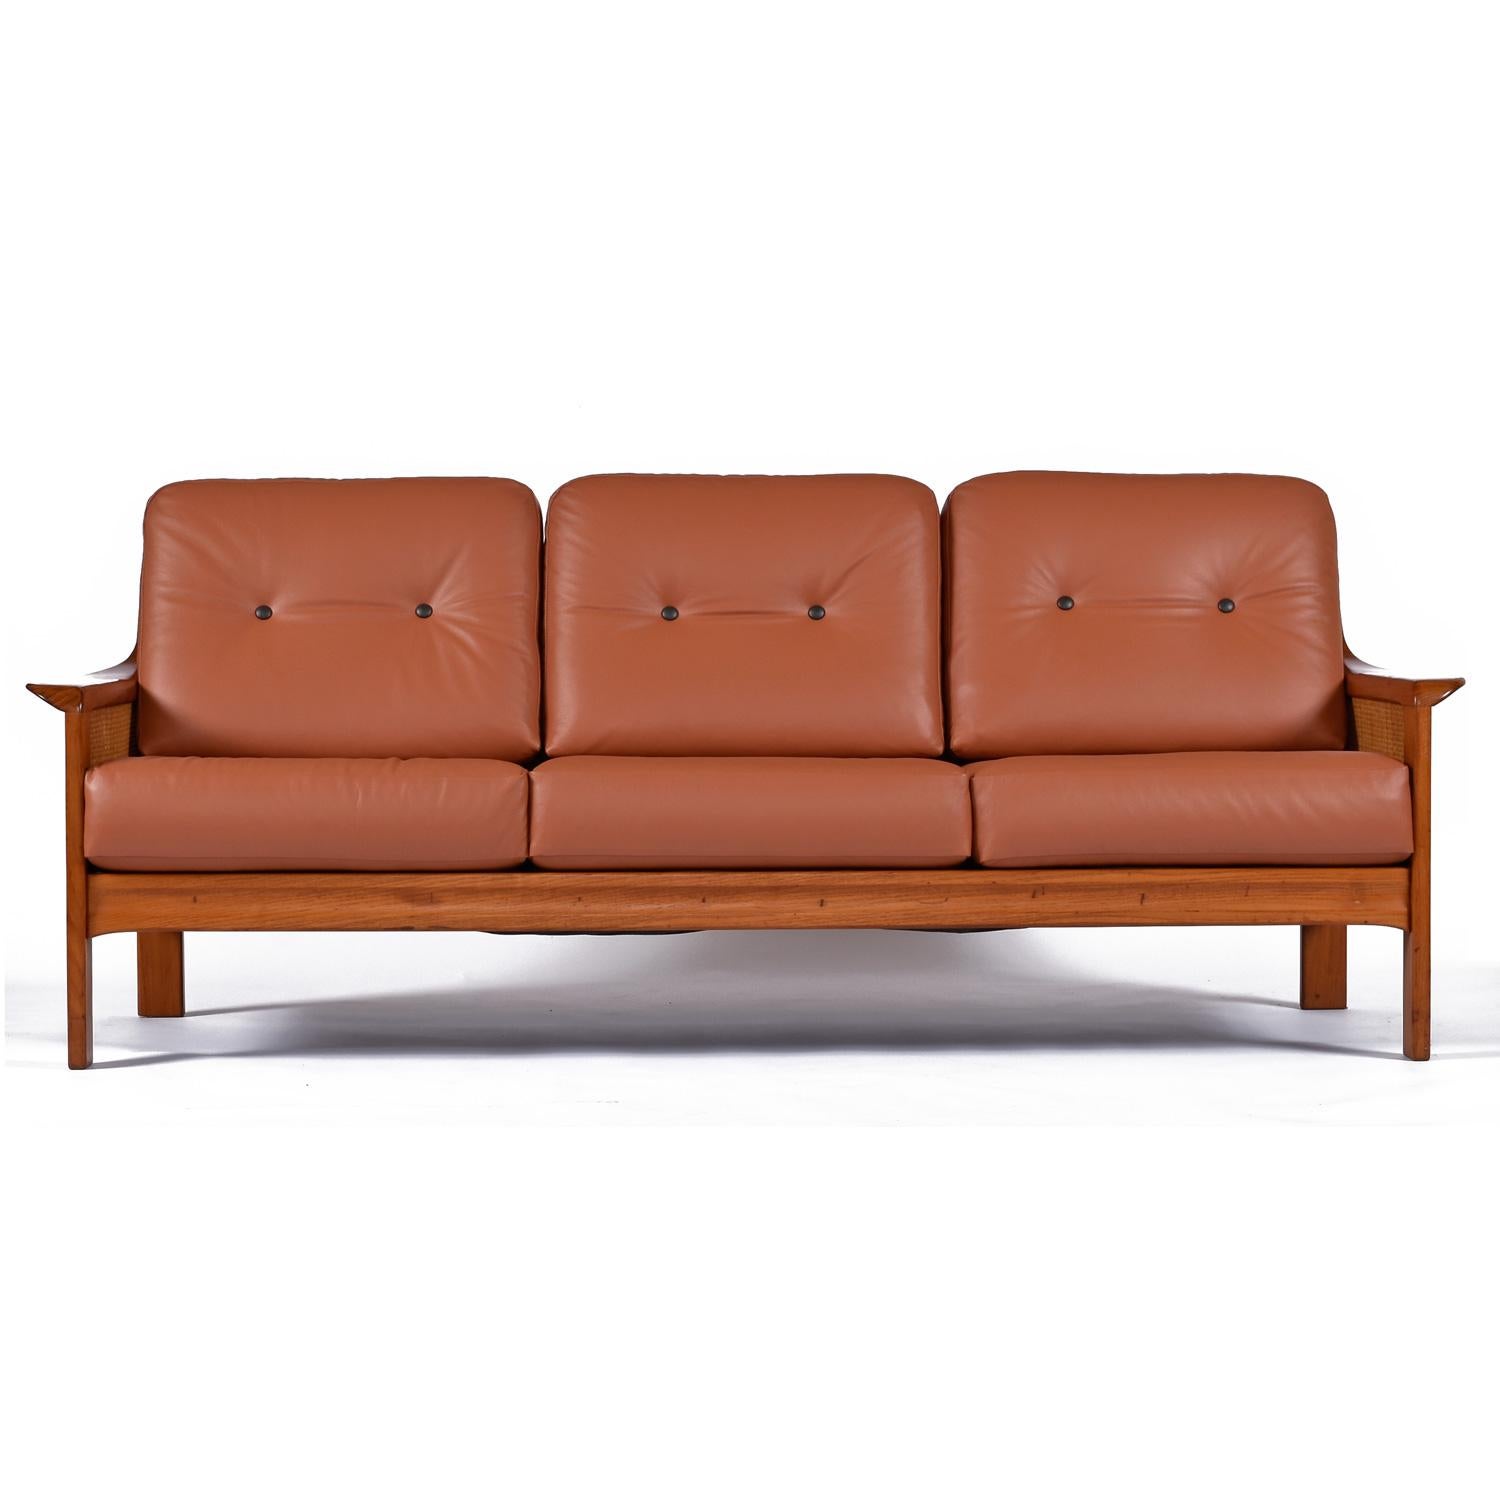 Mid-Century Modern Tufted Leather Balinese Style Danish Modern Solid Teak and Cane Sofa & Chairs